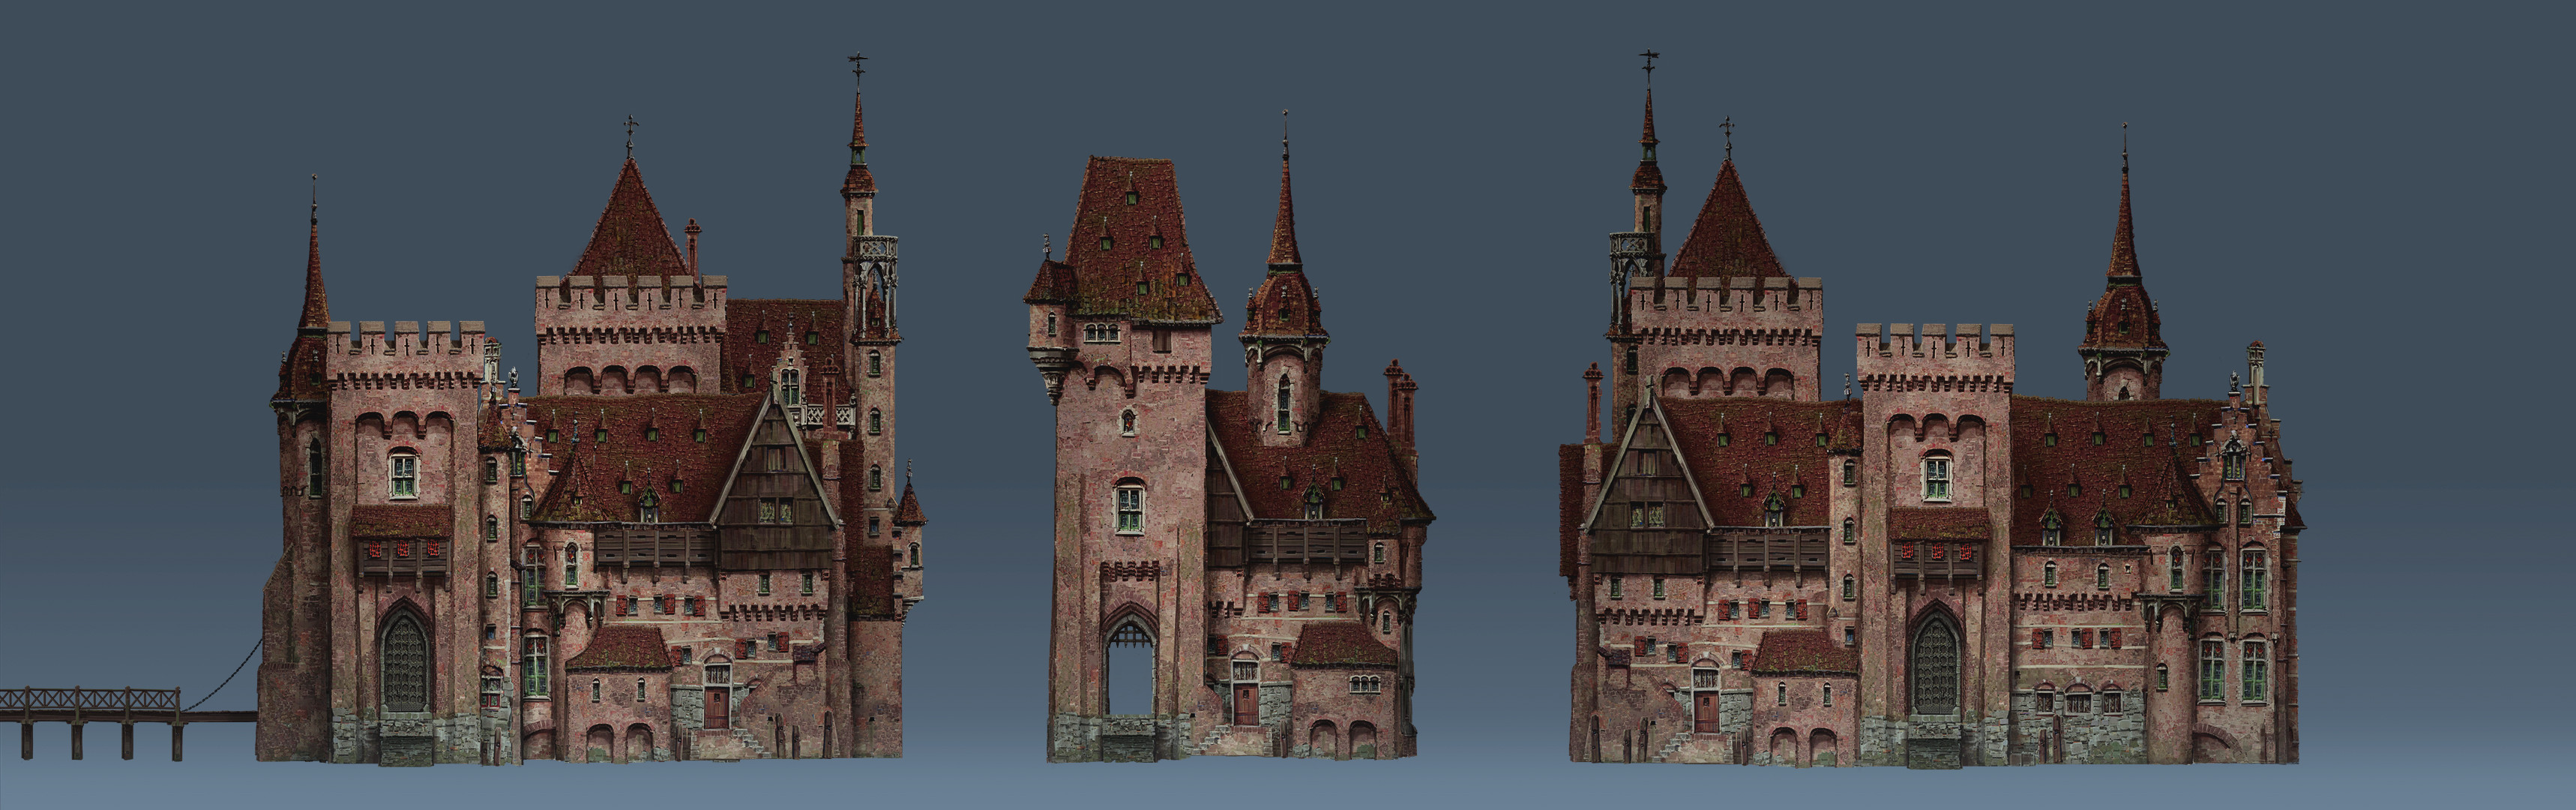 I kept adding new elements and mixing everything around to arrive at a set of walled manor designs.